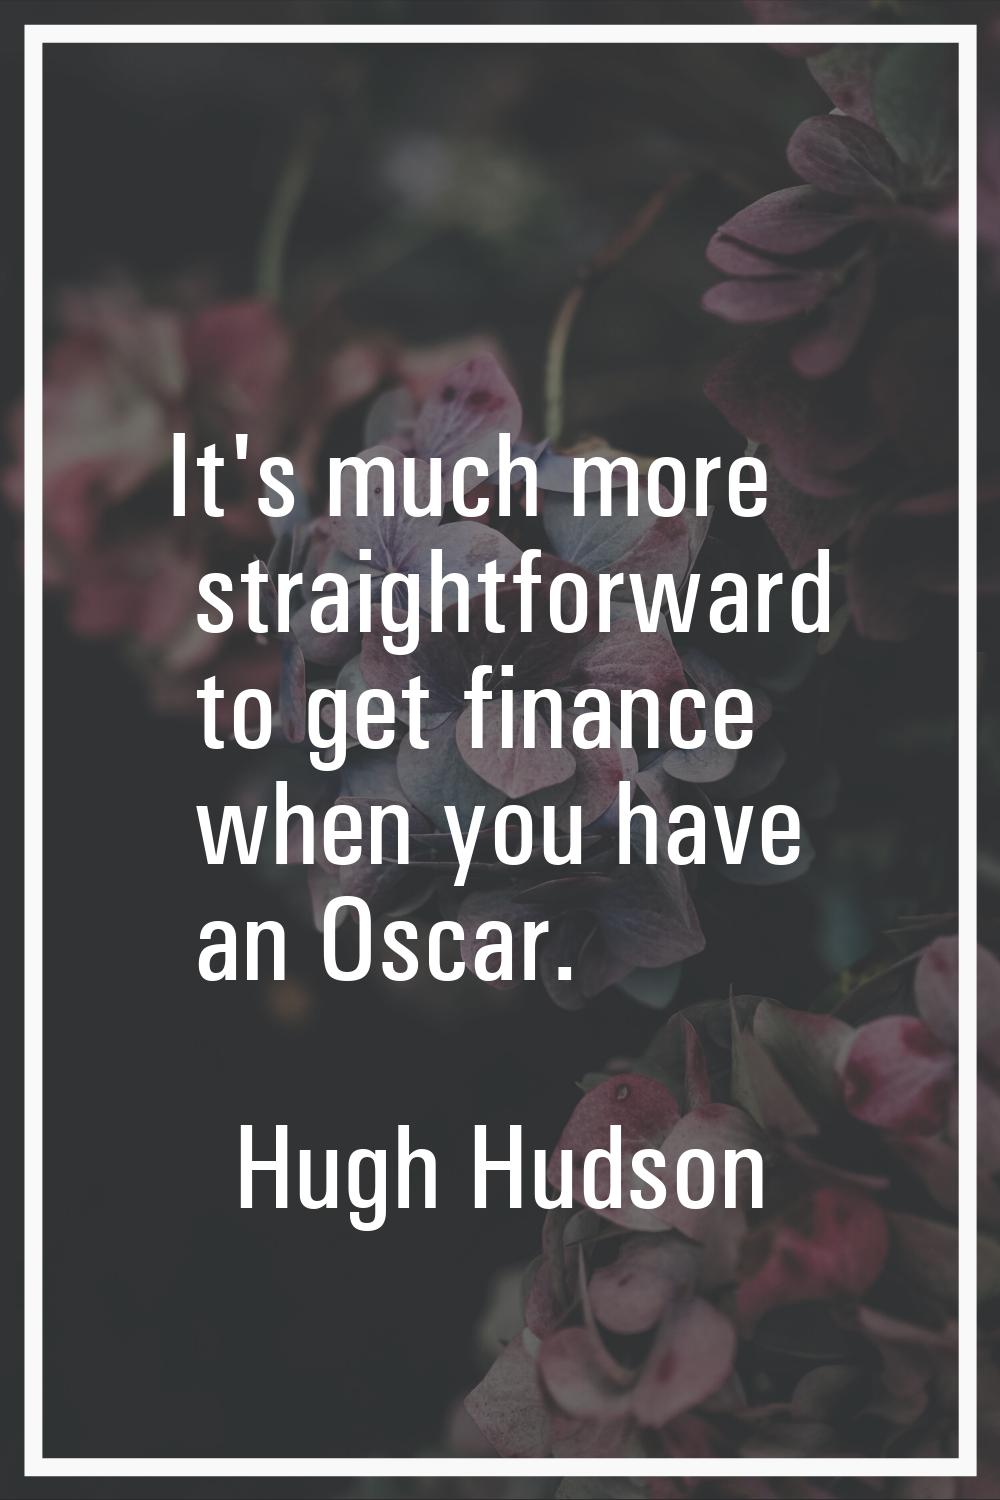 It's much more straightforward to get finance when you have an Oscar.